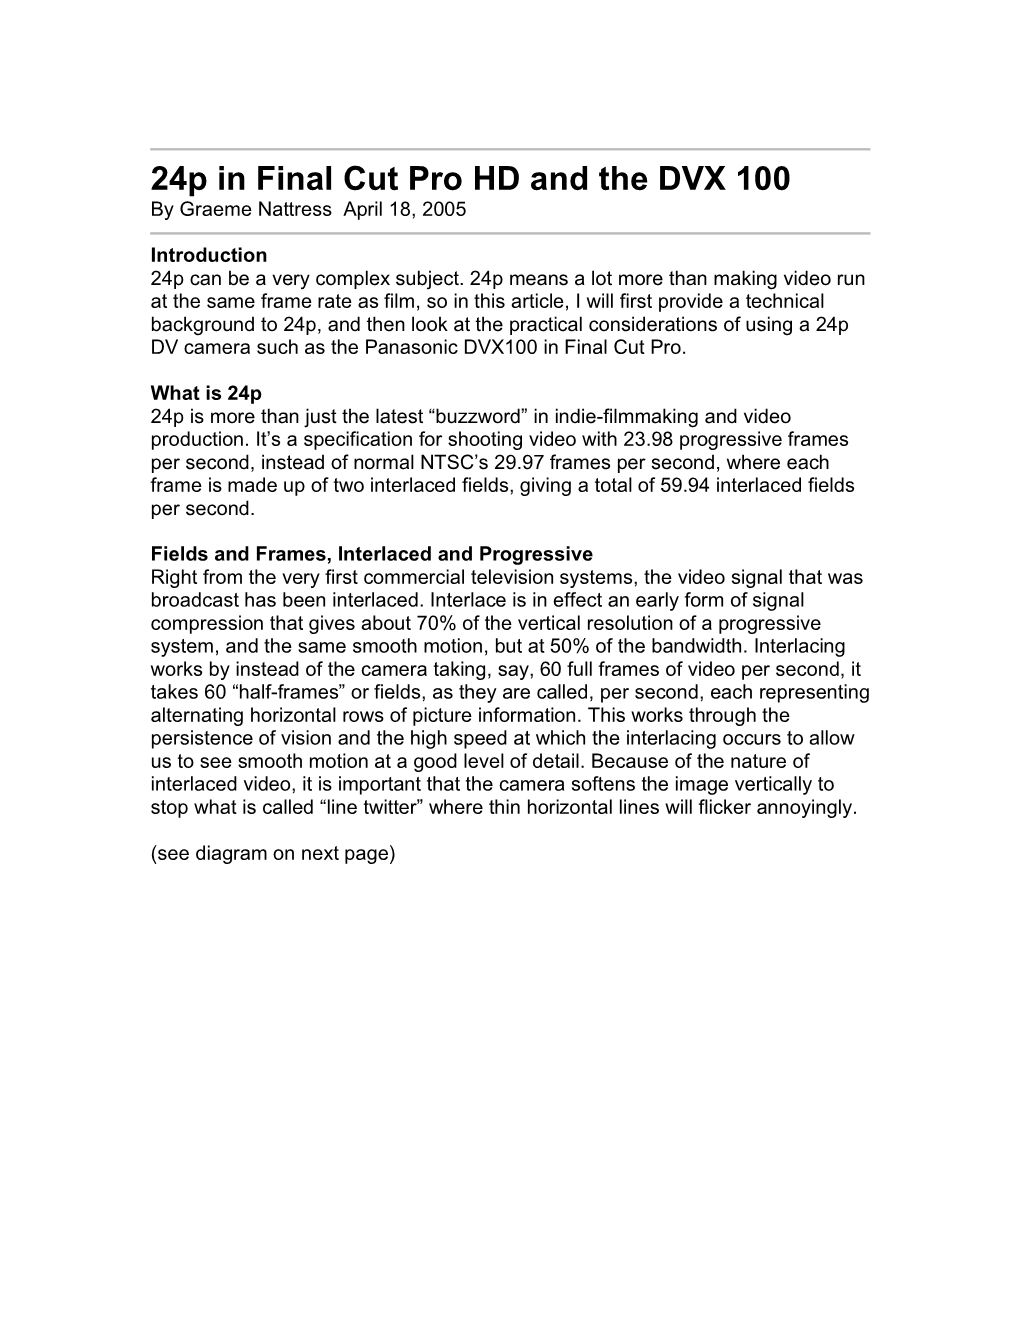 24P in Final Cut Pro HD and the DVX 100 by Graeme Nattress April 18, 2005